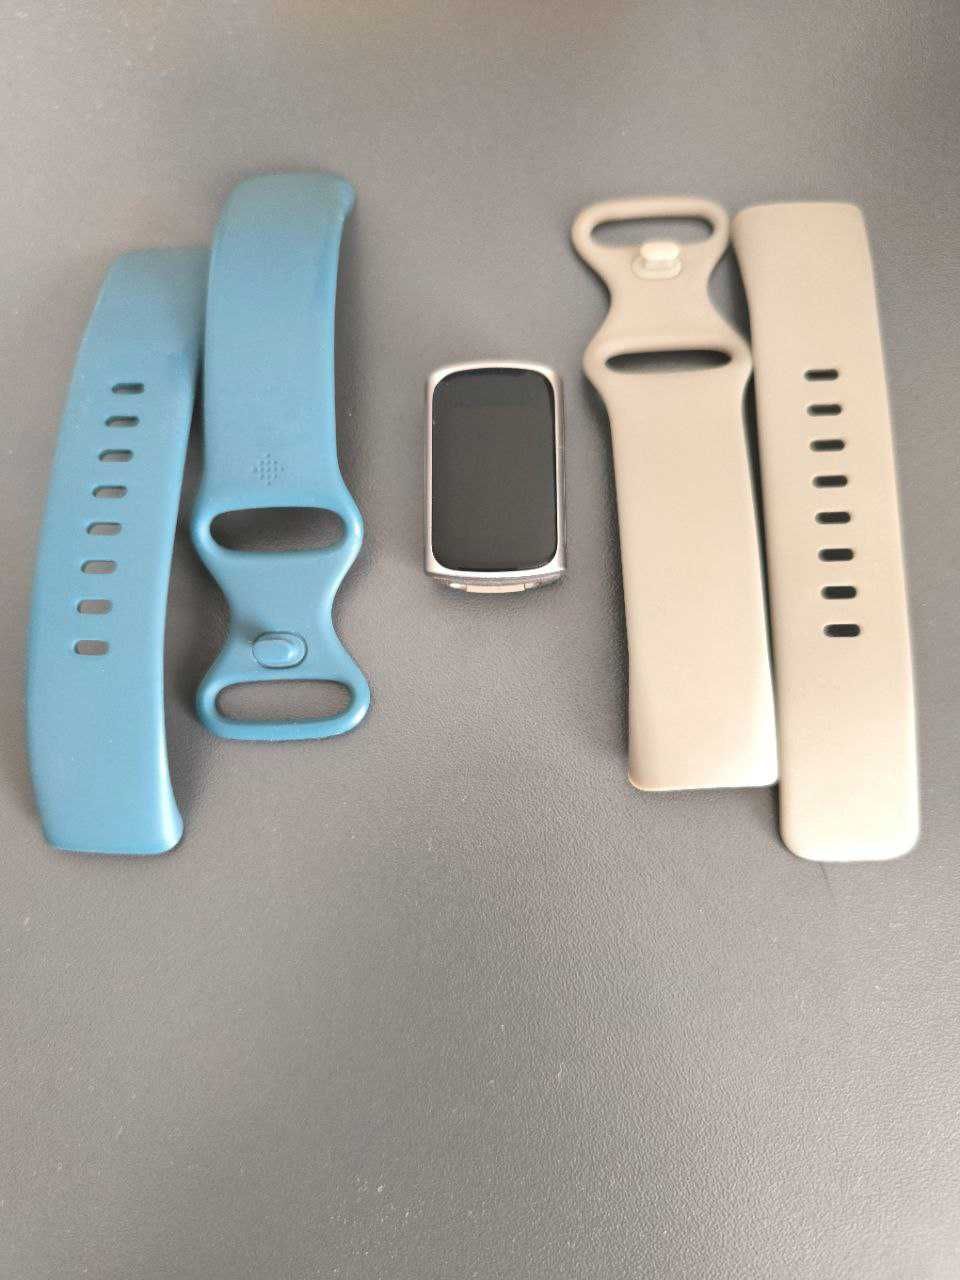 Fitbit Charge 5 Fitness Band